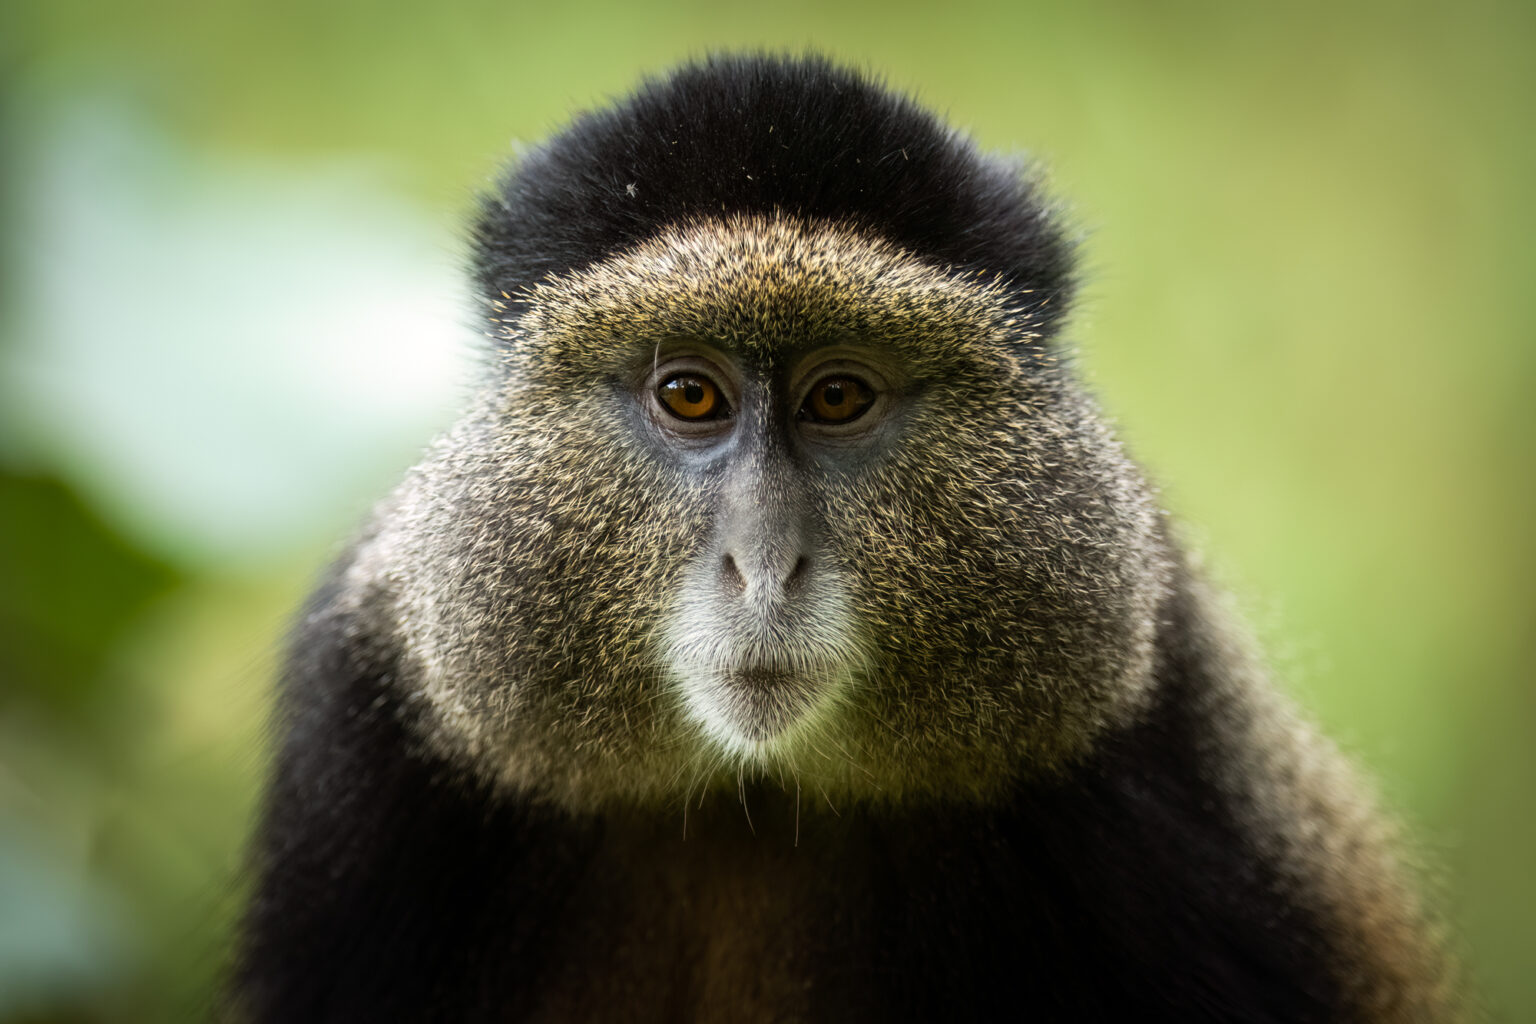 a close up of a monkey with a blurry background.